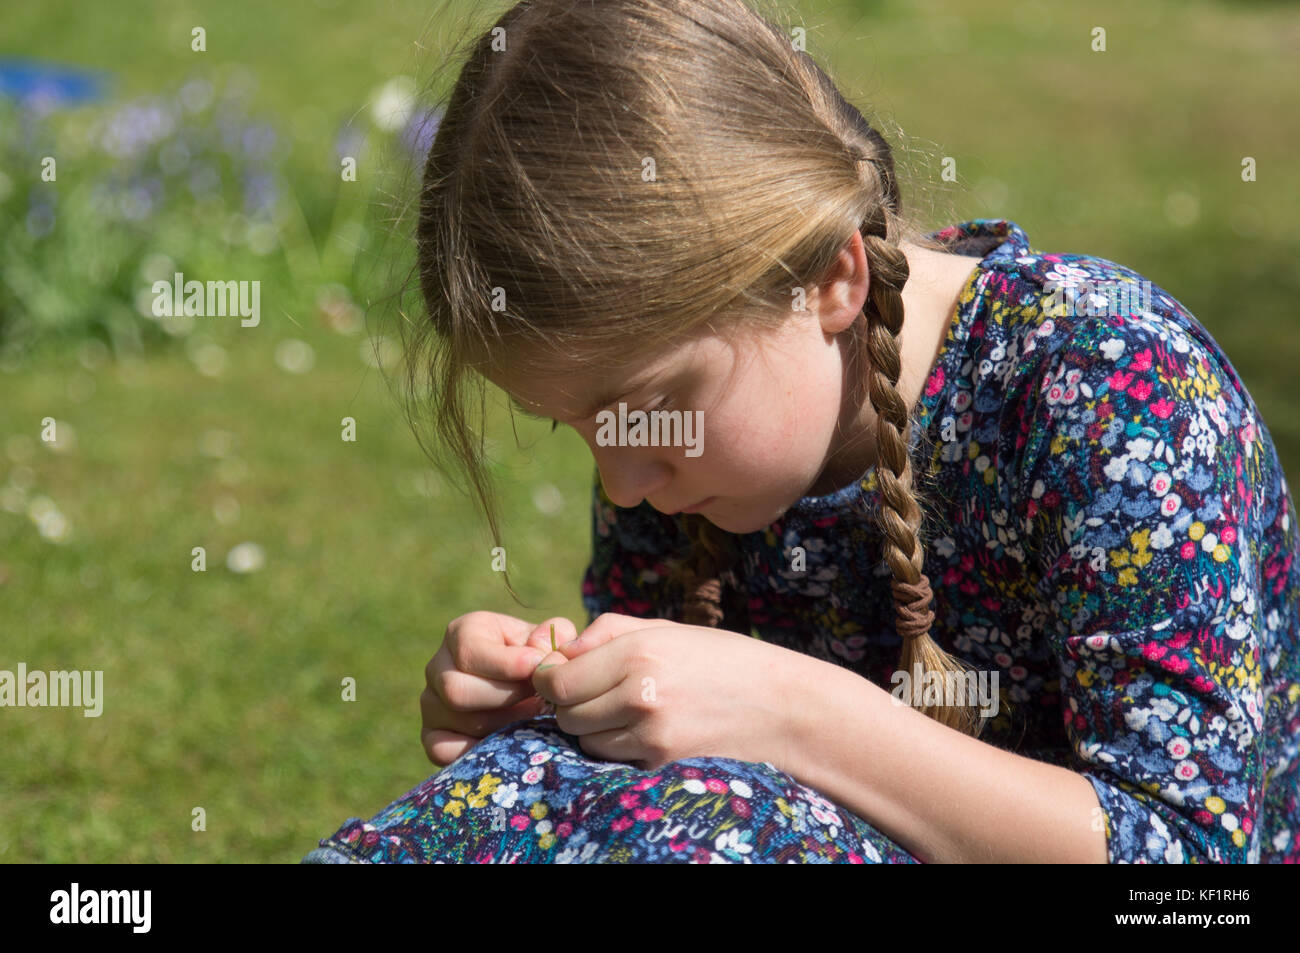 Girl concentrating on daisy chain Stock Photo